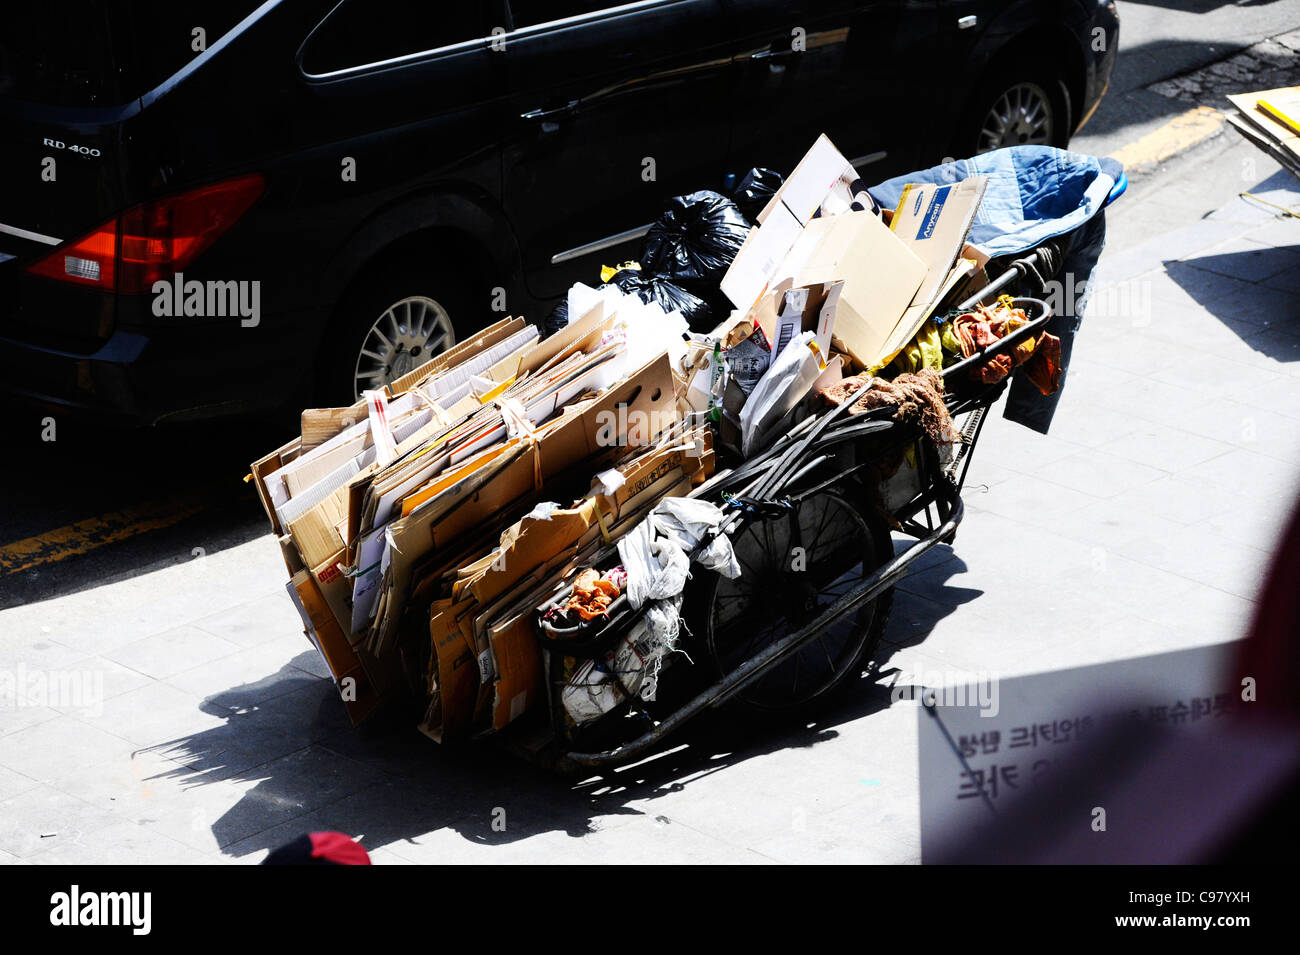 Cardboard boxes for recycling in Busan, South Korea. Stock Photo